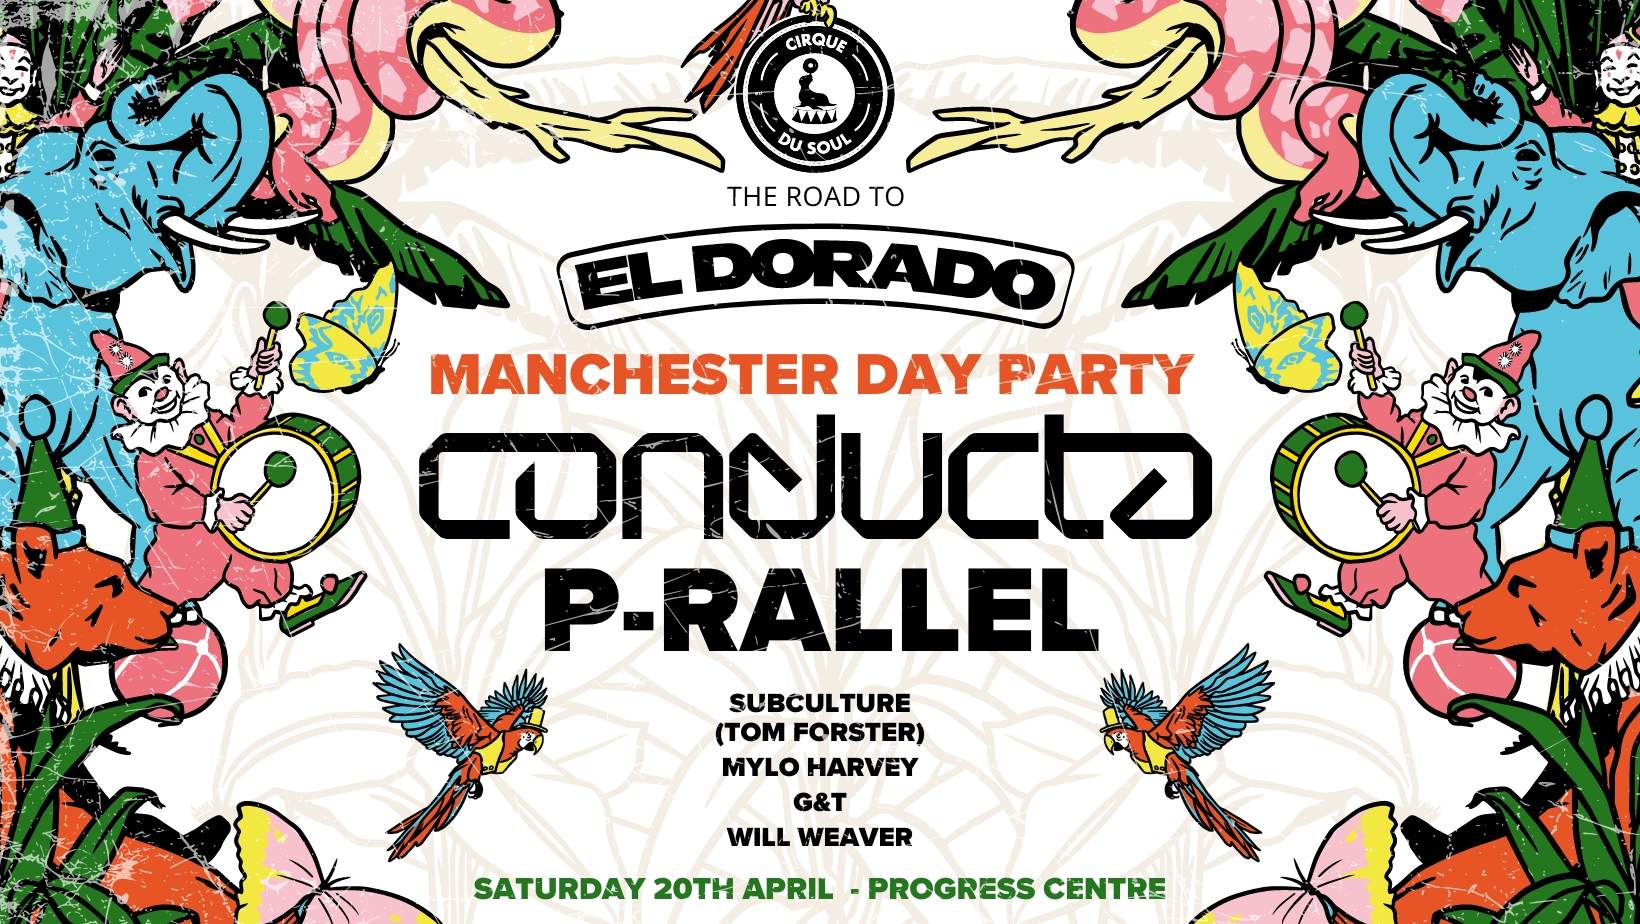 Cirque Du Soul: Manchester // Day Party // Conducta, p-rallel  - Página frontal